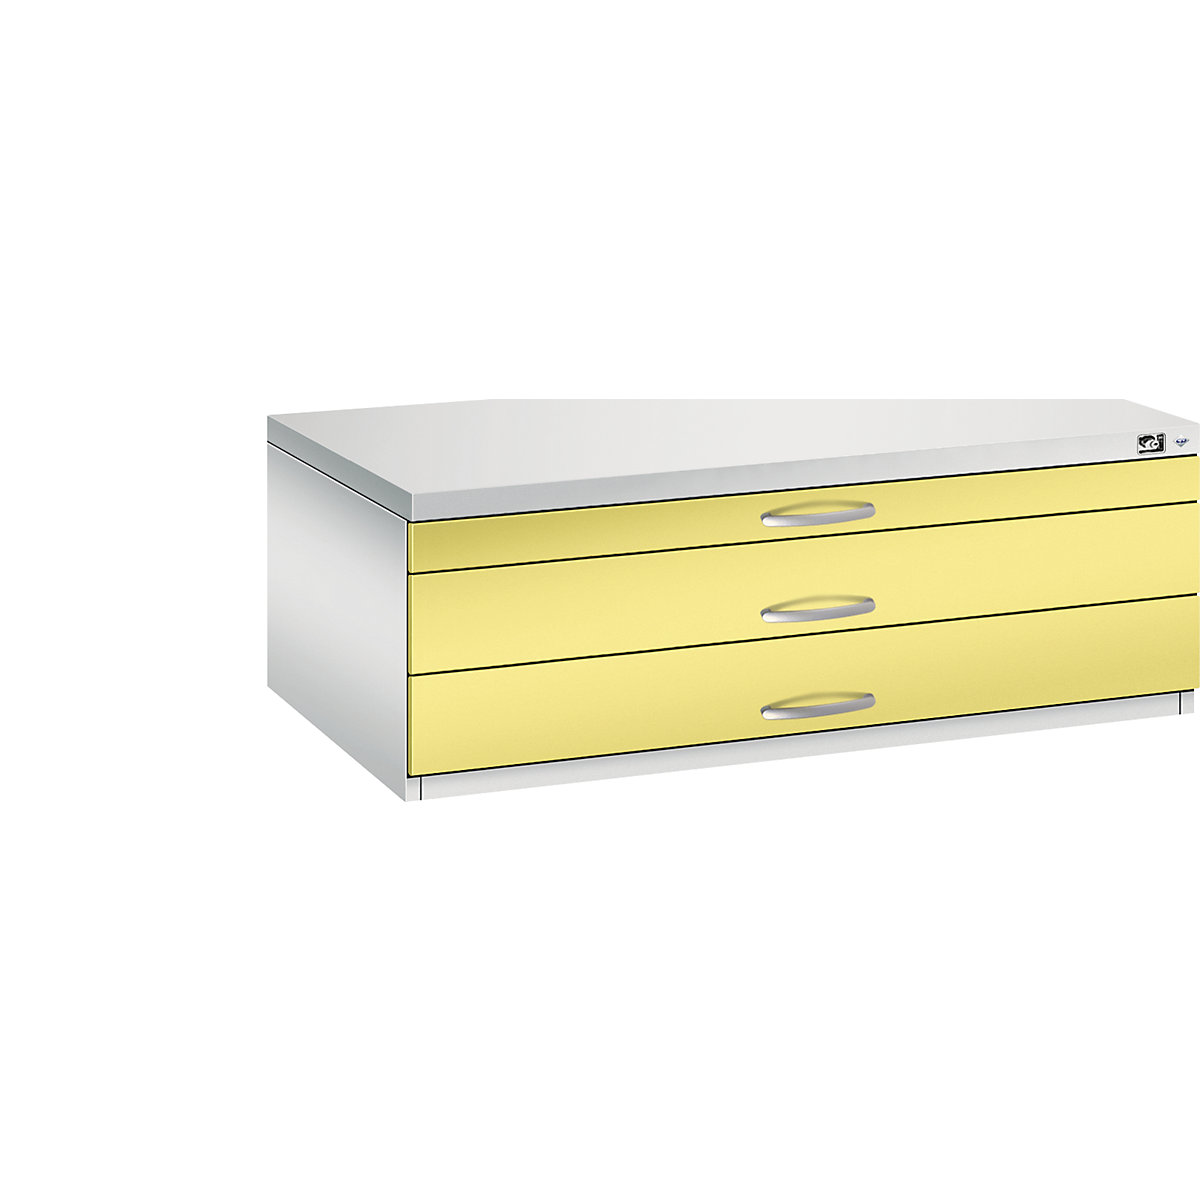 Drawing cabinet – C+P, A1, 3 drawers, height 420 mm, light grey / sulphur yellow-18